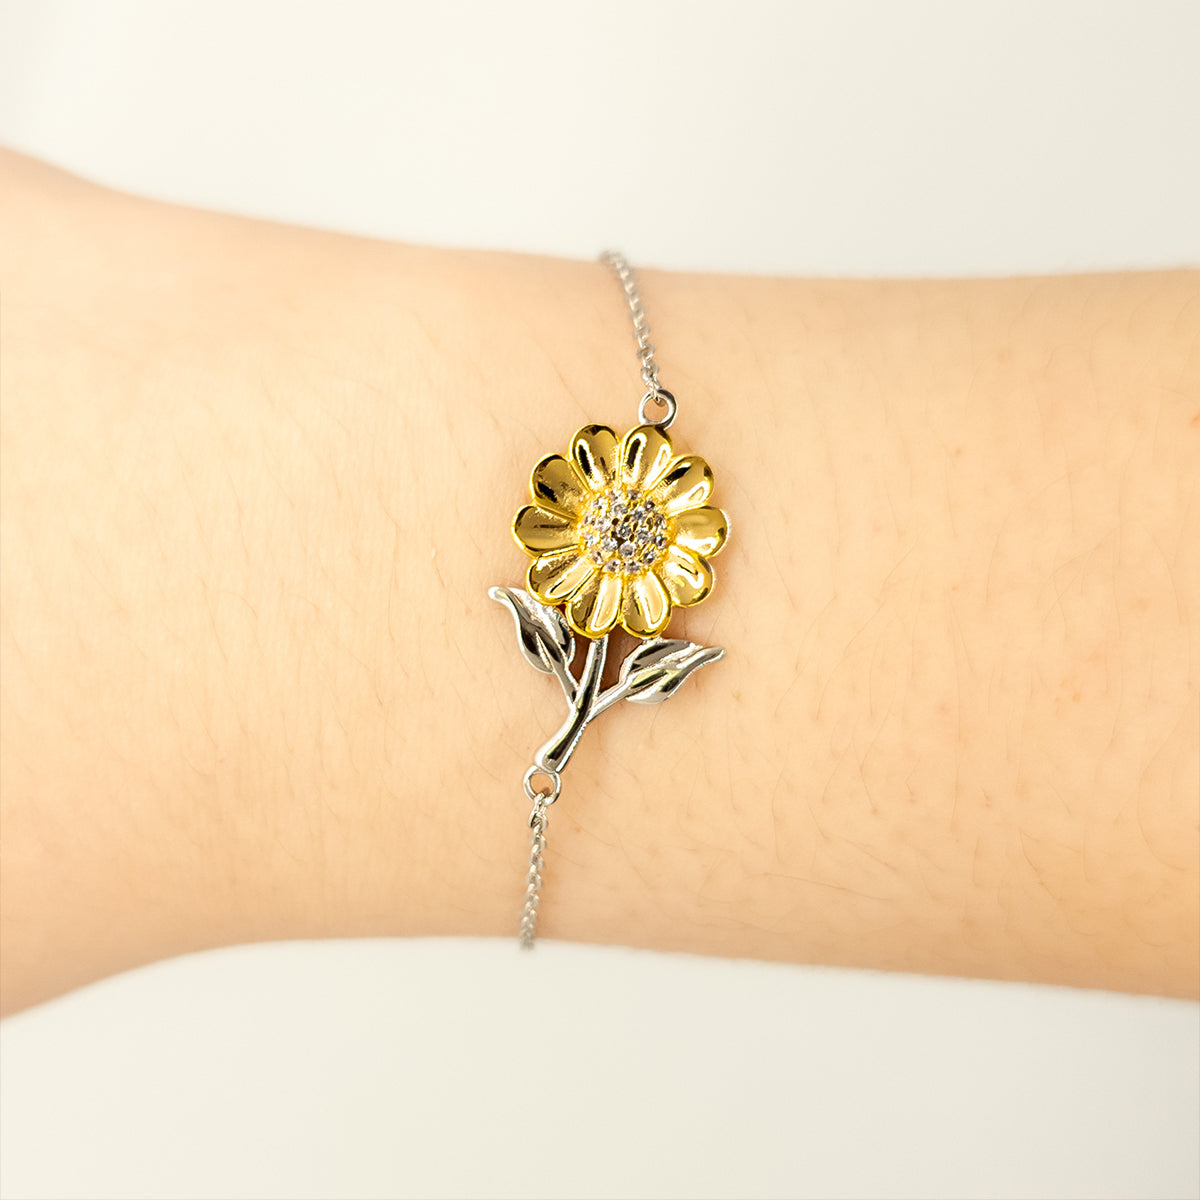 Funny Orthopedic Surgeon Mom Gifts, The best kind of MOM raises Orthopedic Surgeon, Birthday, Mother's Day, Cute Sunflower Bracelet for Orthopedic Surgeon Mom